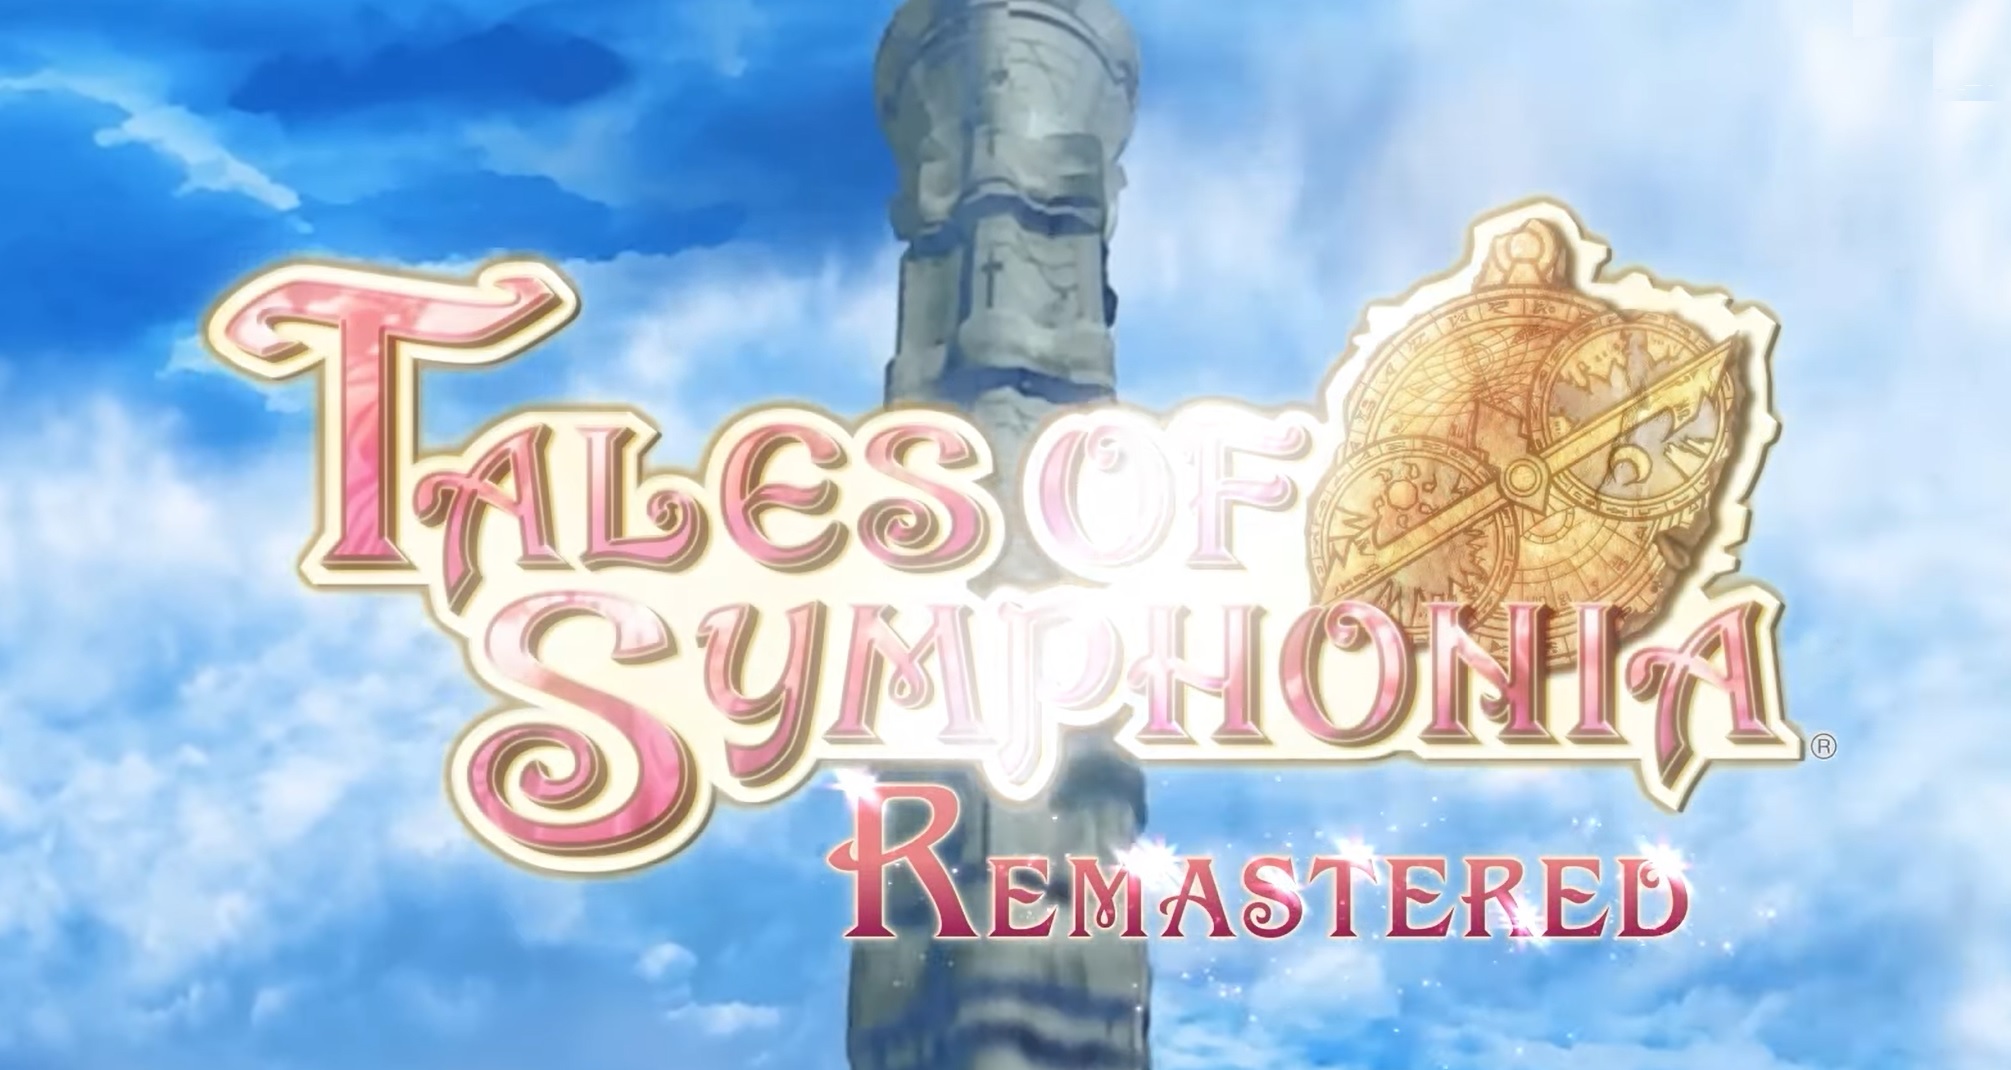 Nuovo story trailer di Tales of Symphonia Remastered